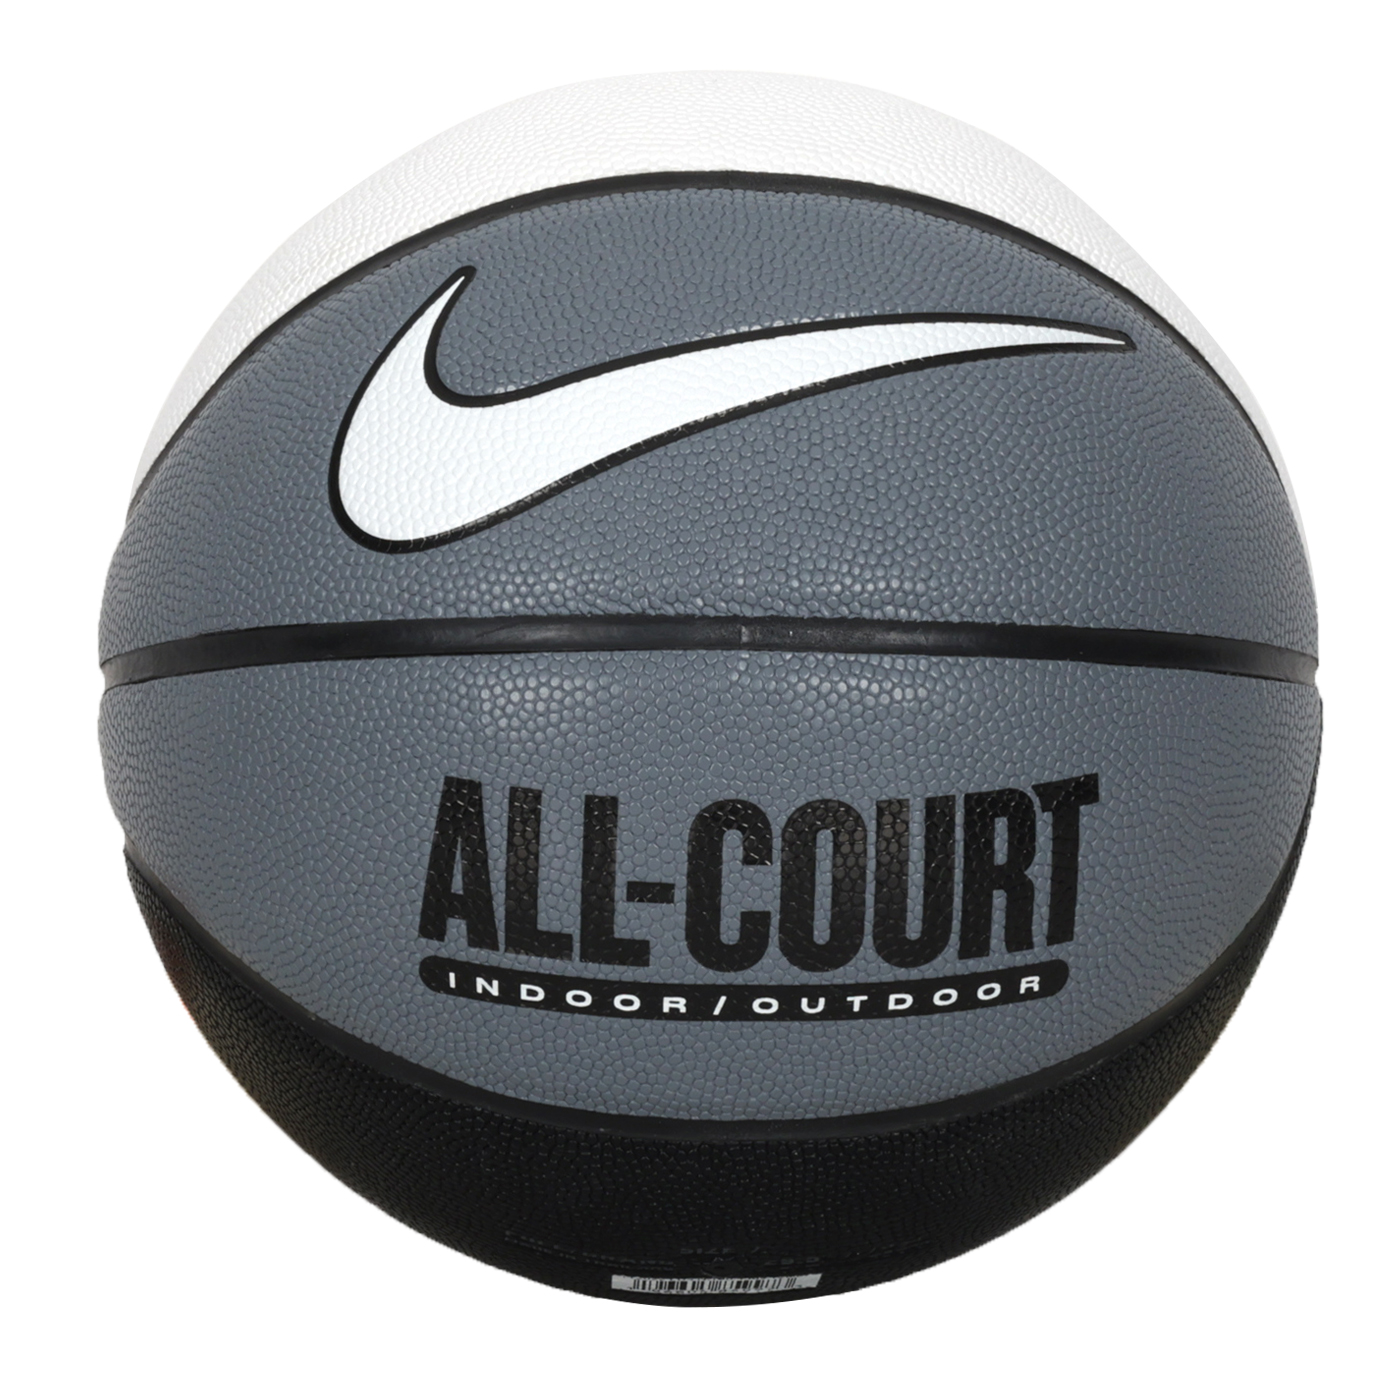 NIKE EVERYDAY ALL COURT 8P 7號籃球  N100436912007 - 白灰黑